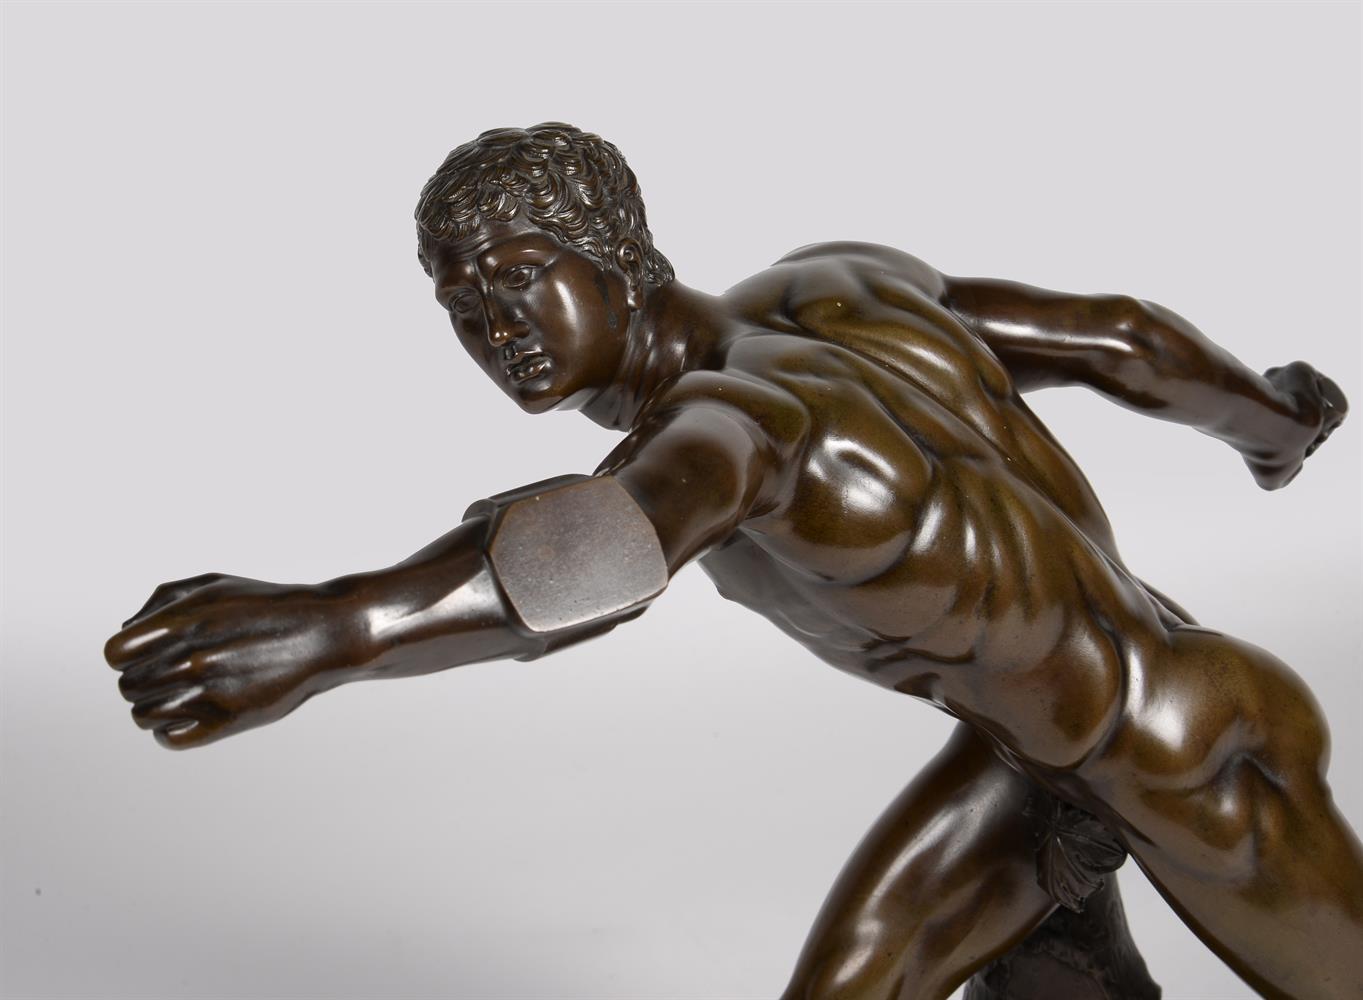 AFTER THE ANTIQUE, A BRONZE FIGURE 'THE BORGHESE GLADIATOR', MID-19TH CENTURY - Image 2 of 8